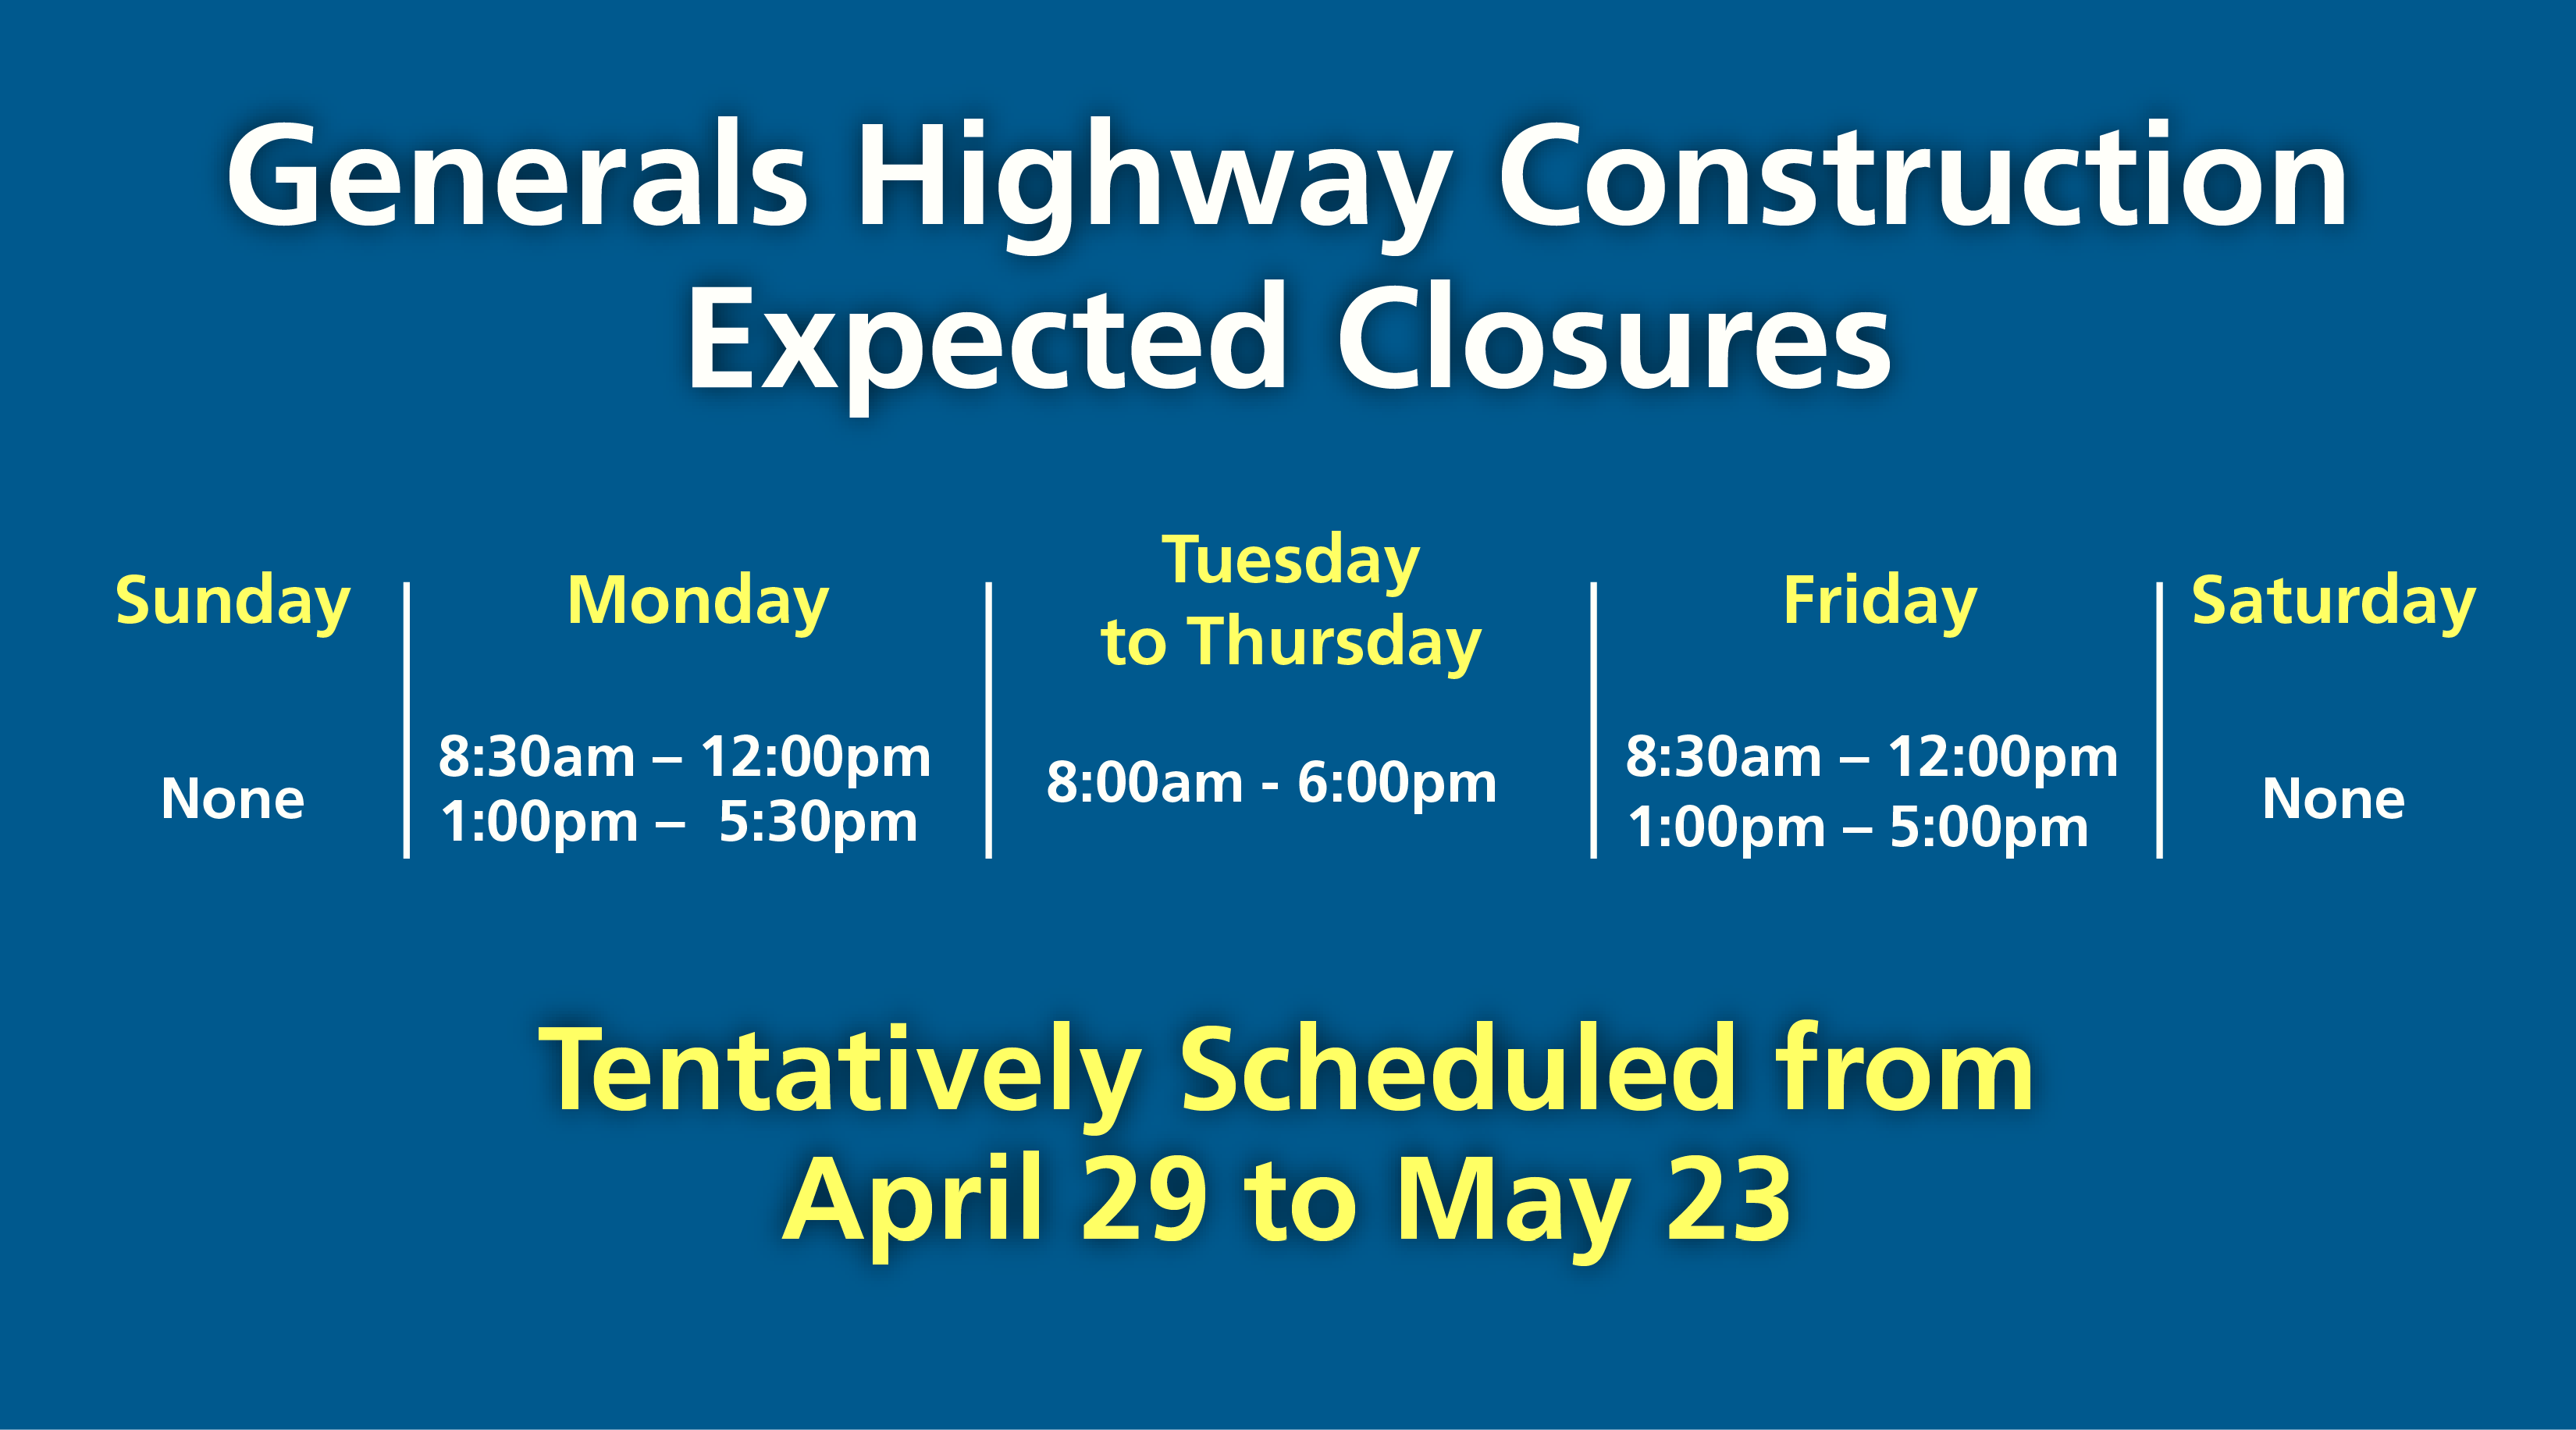 Blue infographic of Generals Highway expected closures. Sunday: none. Monday: 8:30 AM to 12 PM and 1 PM to 5:30 PM. Tuesday to Thursday: 8 AM to 6 PM. Friday: 8:30 AM to 12 PM and 1 PM to 5 PM. Saturday: none. Tentatively Scheduled from April 29 to May 23